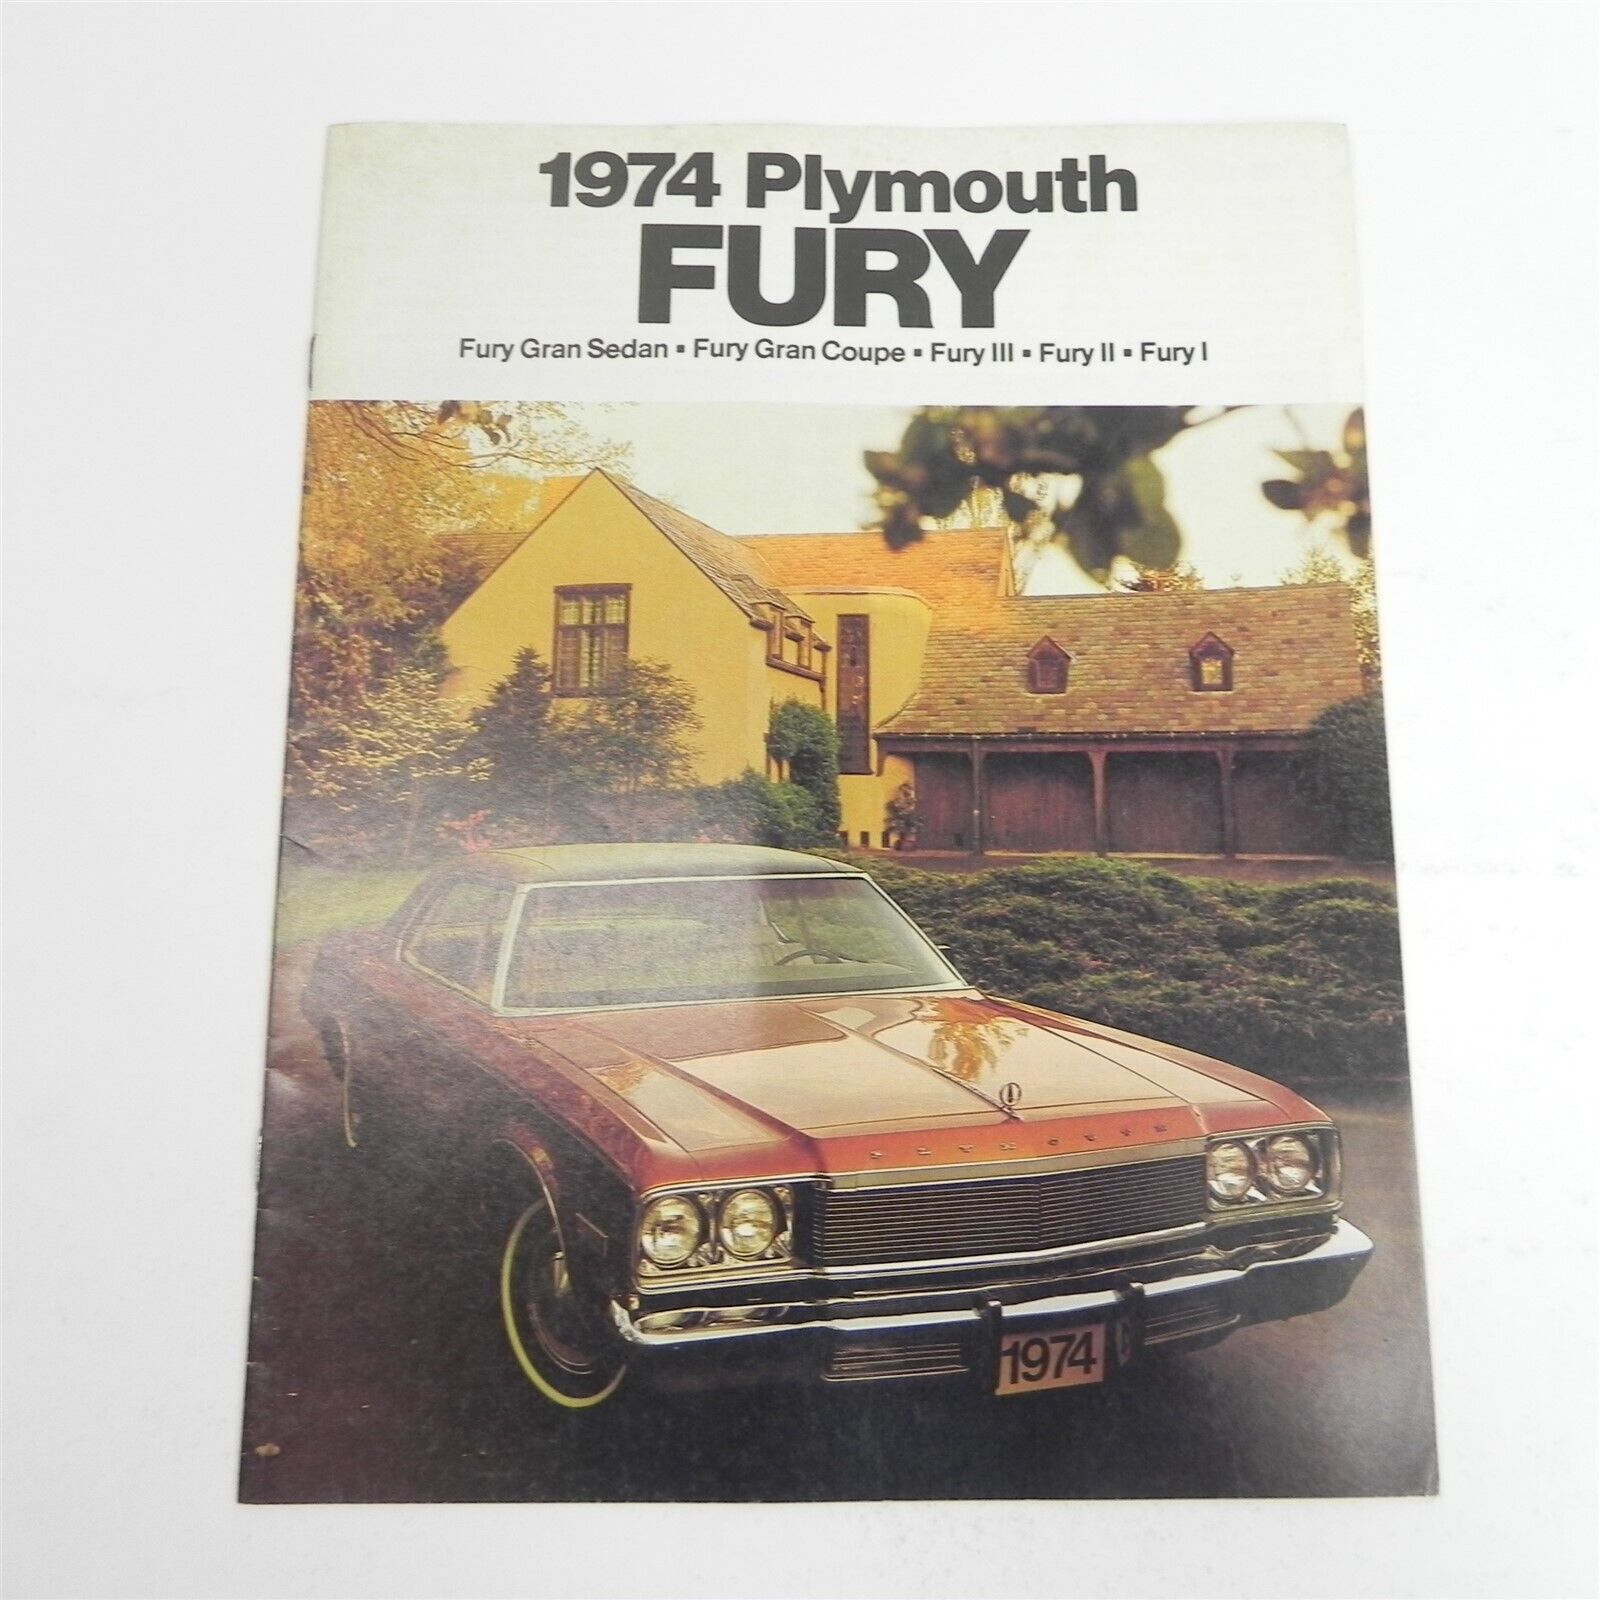 VINTAGE 1974 PLYMOUTH FURY DEALERSHIP SALES BROCHURE SPECIFICATIONS INFORMATION